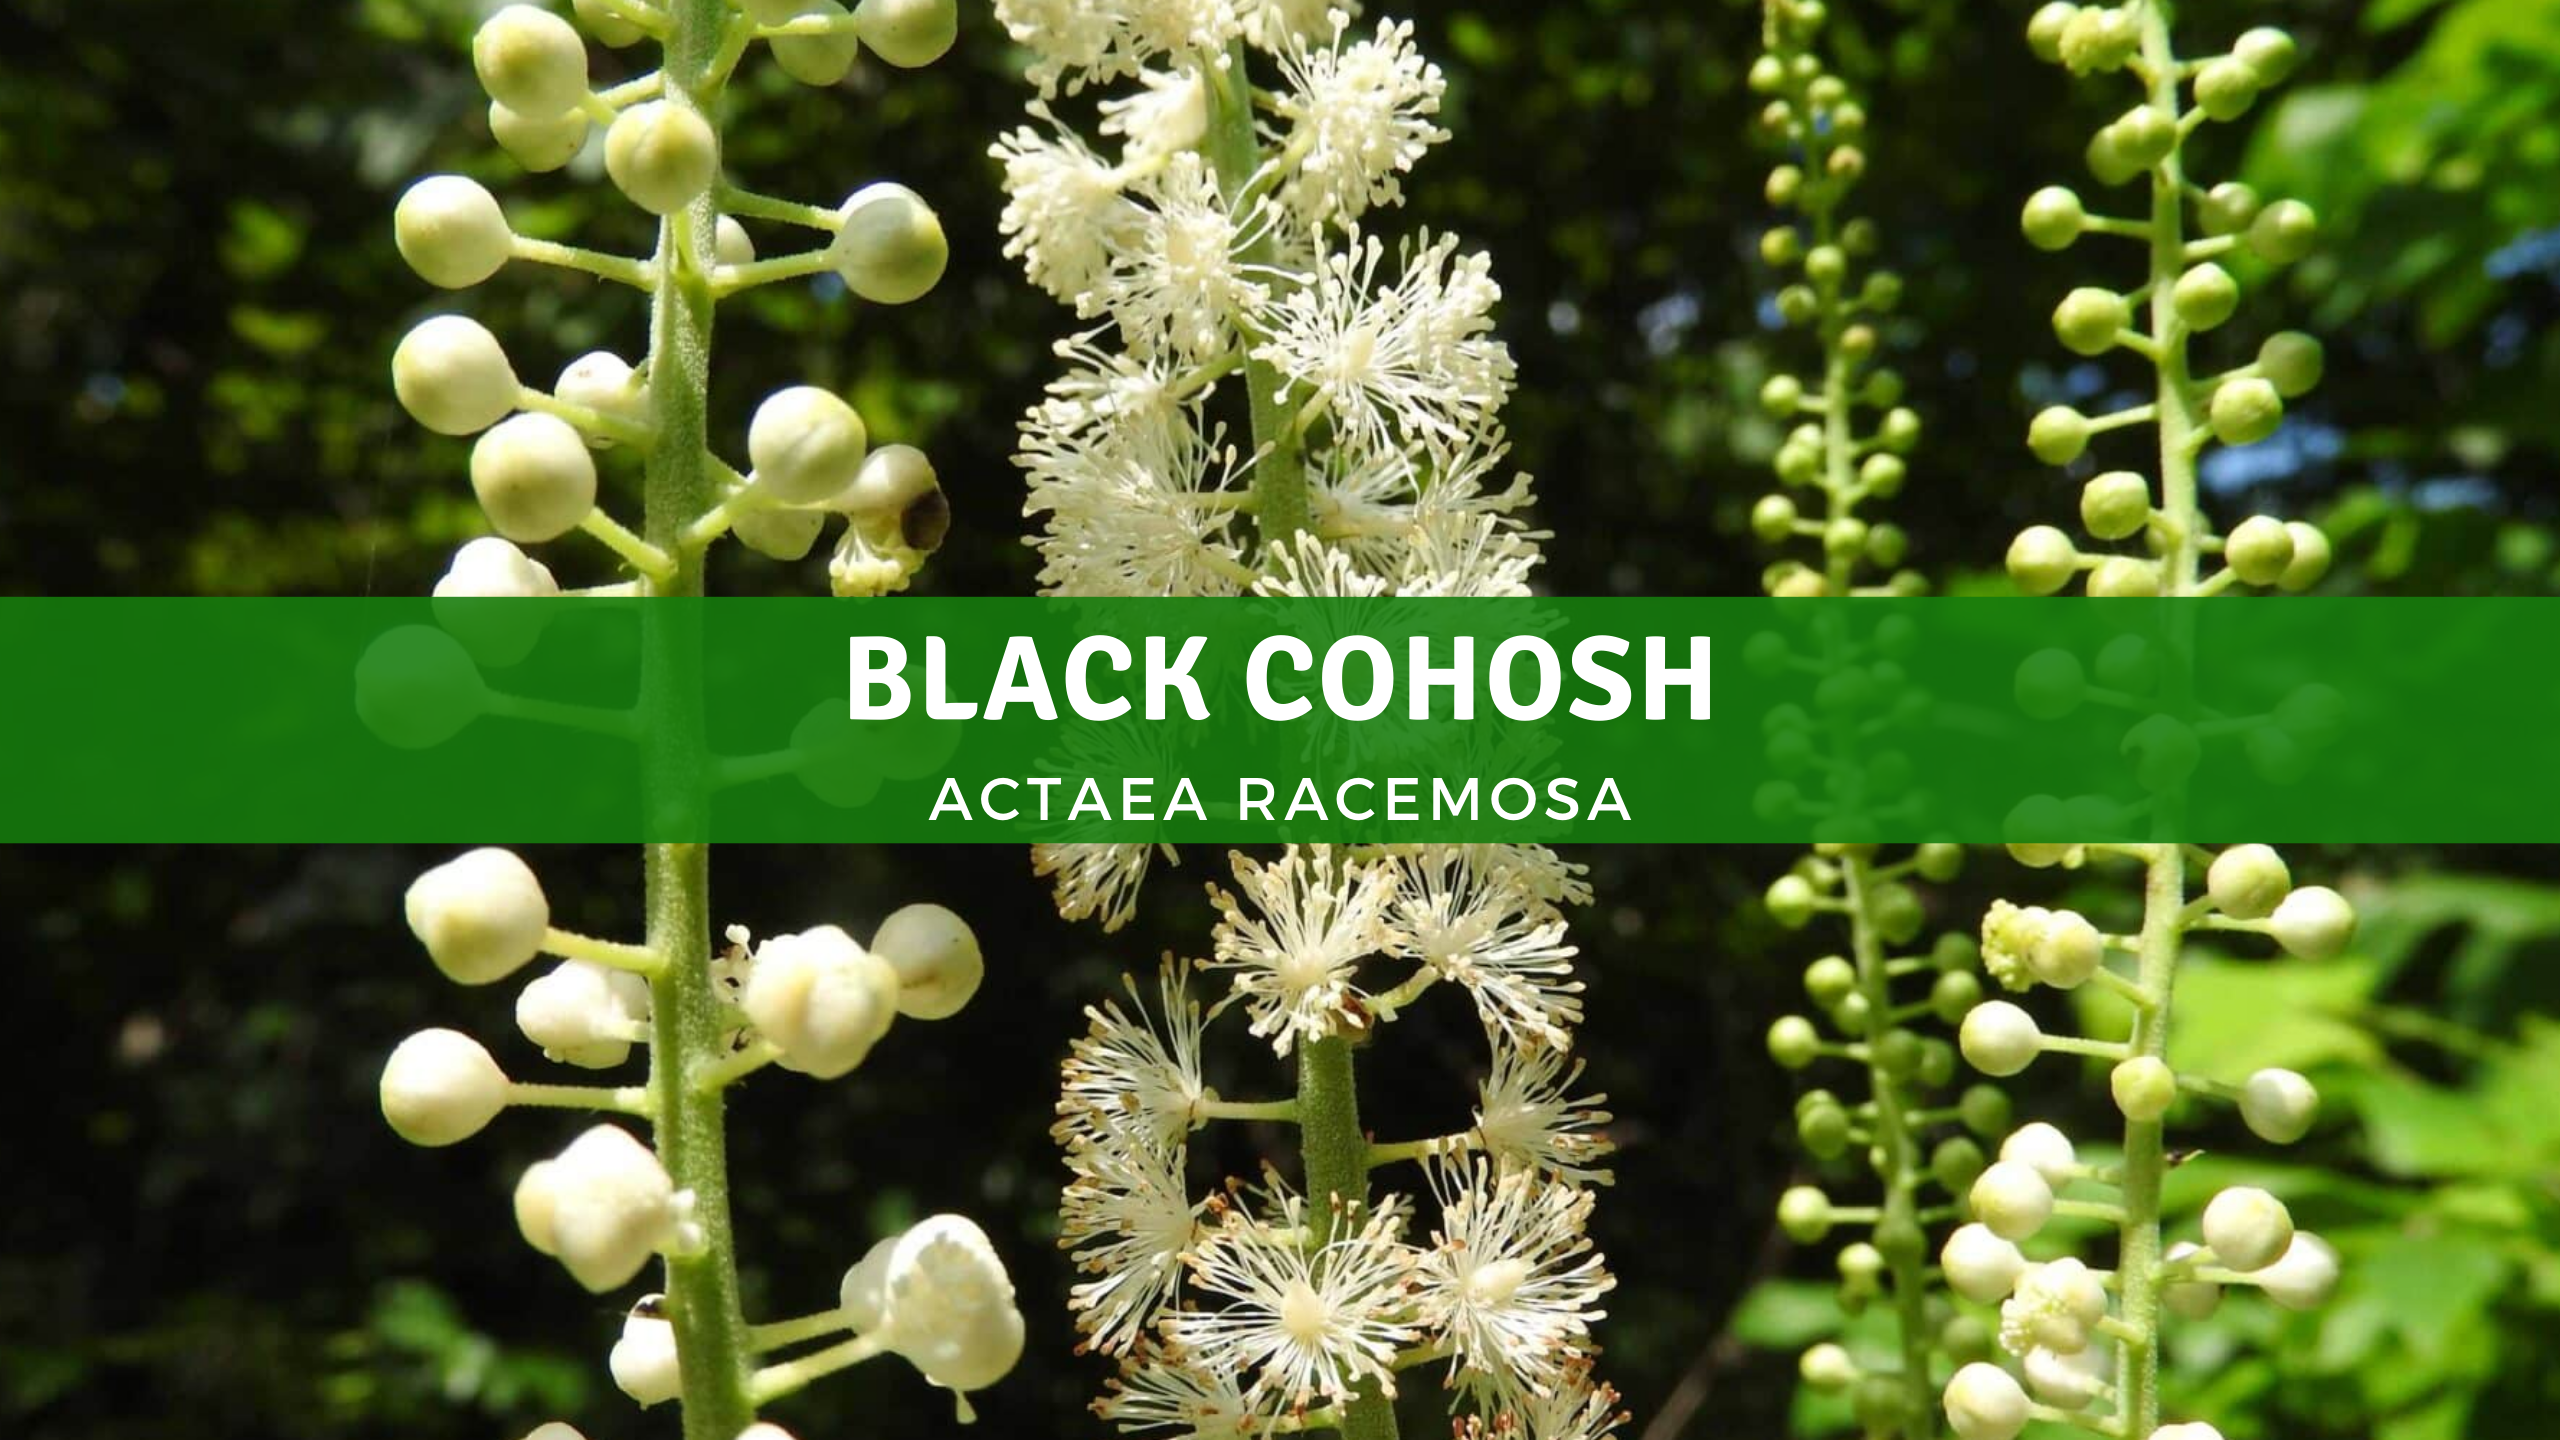 Benefits of Black Cohosh for Women's Health